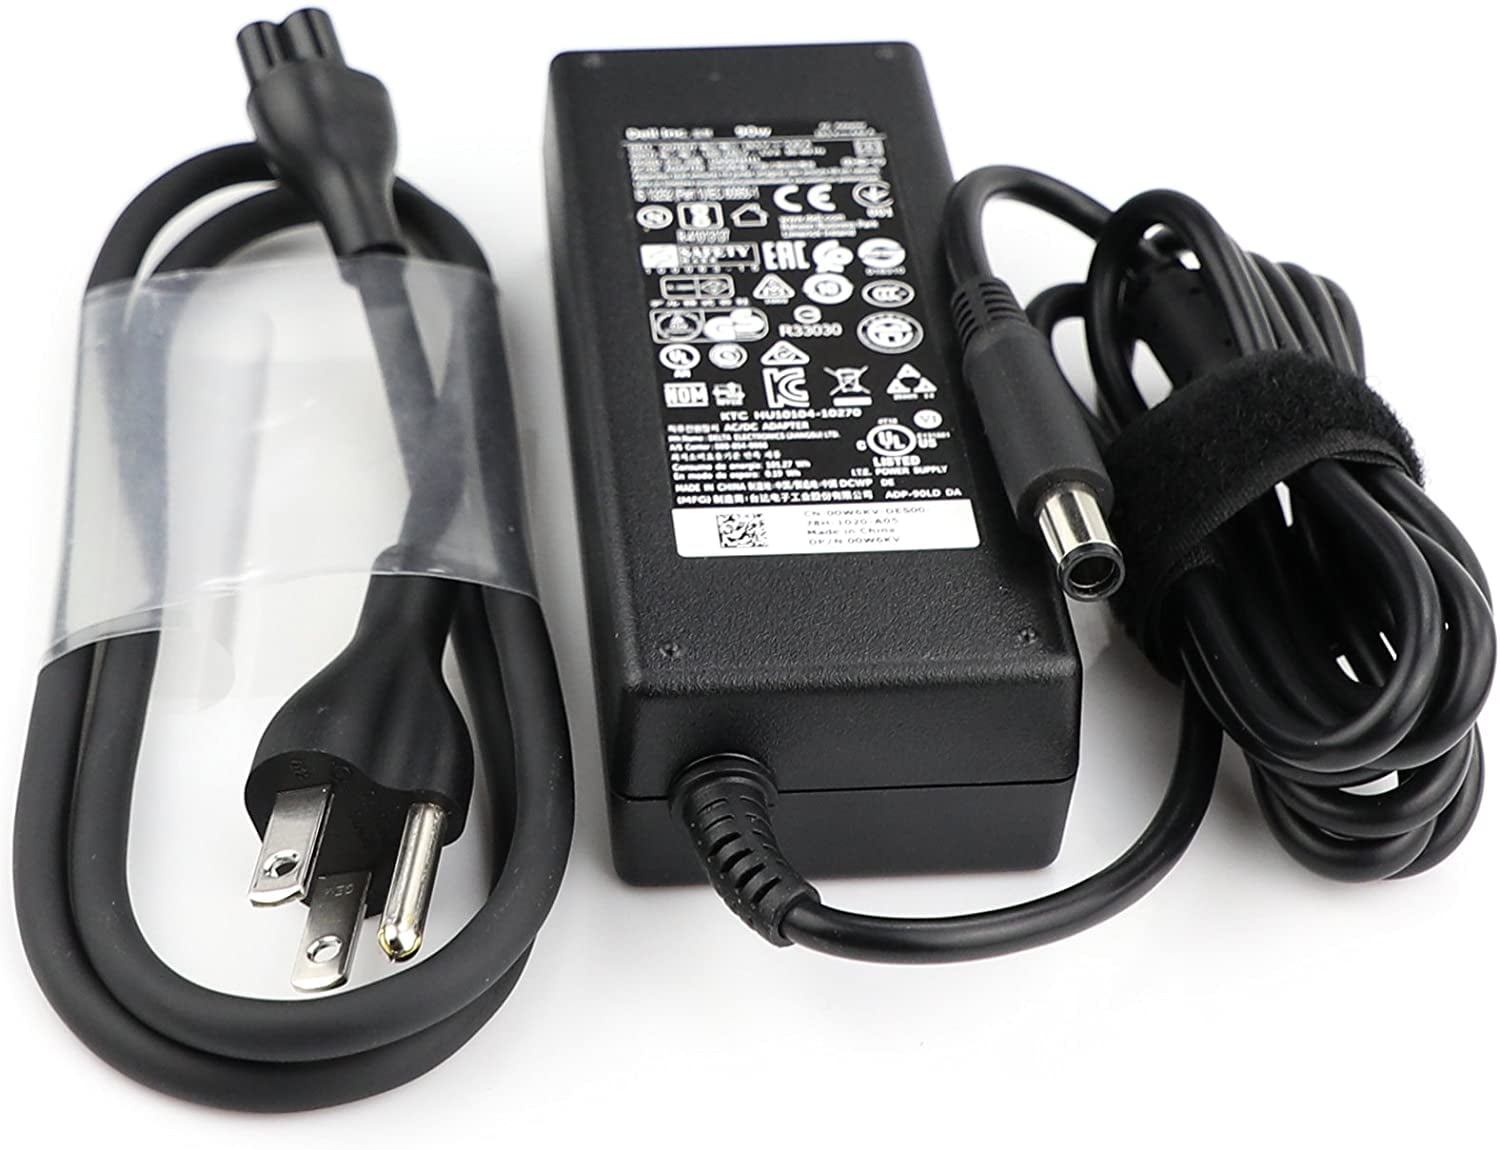 FITE ON 18V AC DC Power Adapter Charger for JBL 700-0094-001 700-0078-001  Mains Supply